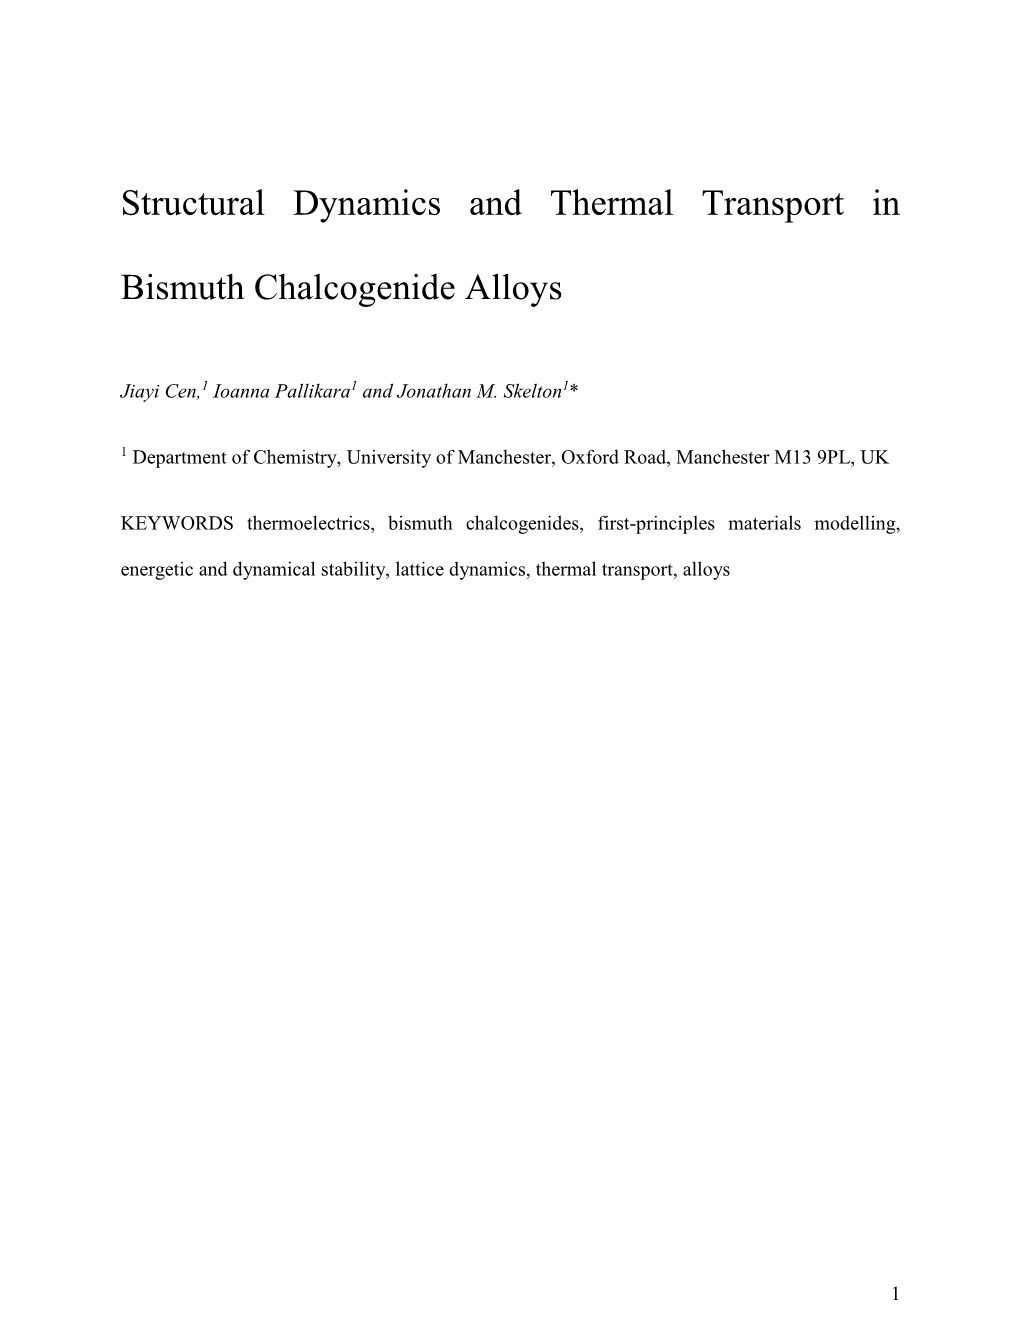 Structural Dynamics and Thermal Transport in Bismuth Chalcogenide